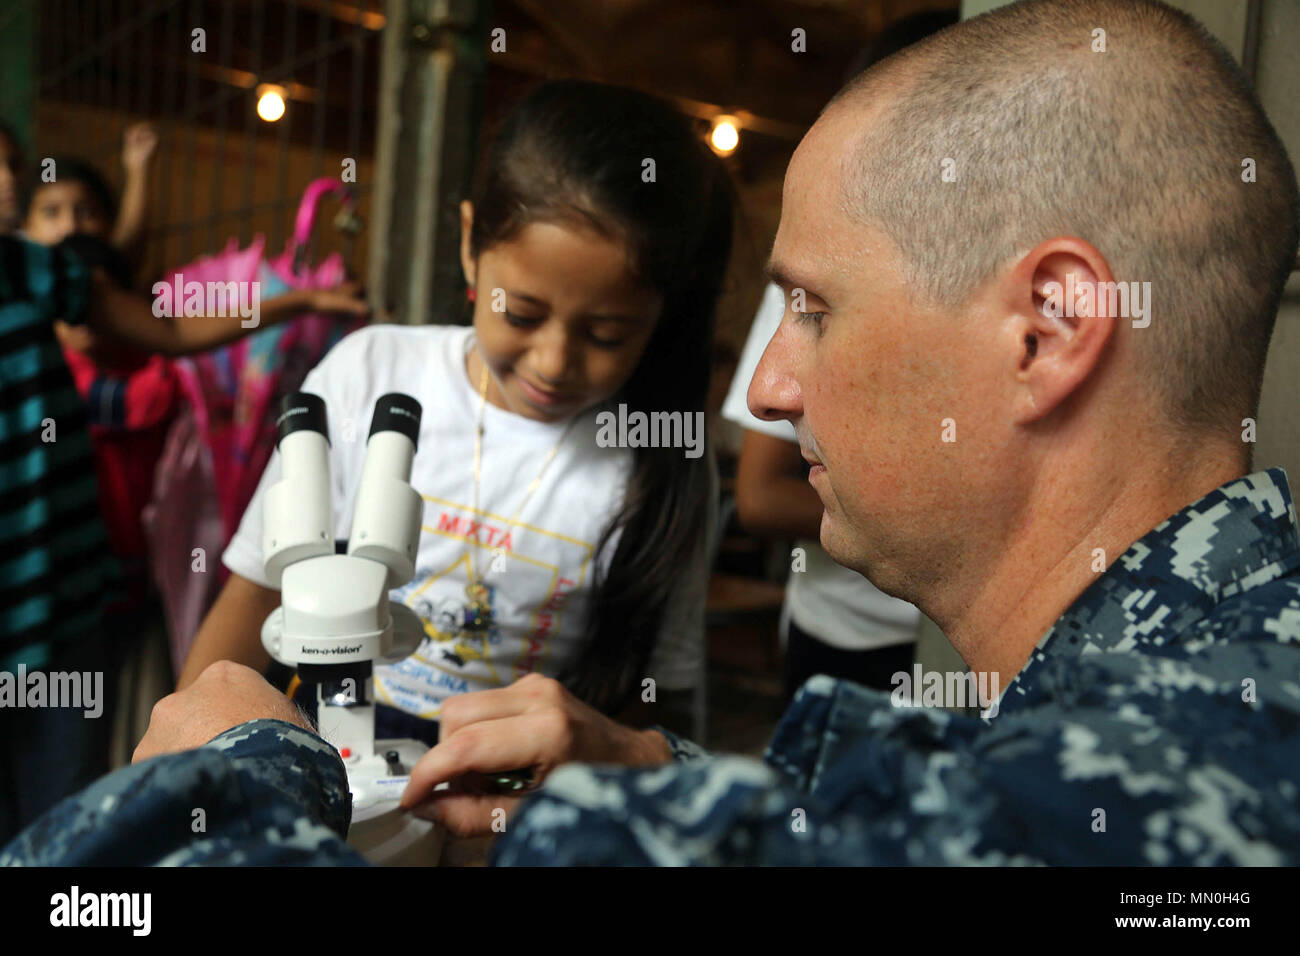 170804-A-QE286-401 TARROS, Honduras (Aug. 4, 2017) U.S. Navy Lt. Cmdr. Ian Sutherland, technical director for the Navy Entomology Center of Excellence, helps Honduran elementary school students view insects through a microscope, during an entomology class at Escuela Rural Mixta Luz Infantil, as part of a Southern Partnership Station 17 community relations (COMREL) project. SPS-EPF 17 is a U.S. Navy deployment, executed by U.S. Naval Forces Southern Command/U.S. 4th Fleet, focused on subject matter expert exchanges with partner nation militaries and security forces in Central and South America. Stock Photo